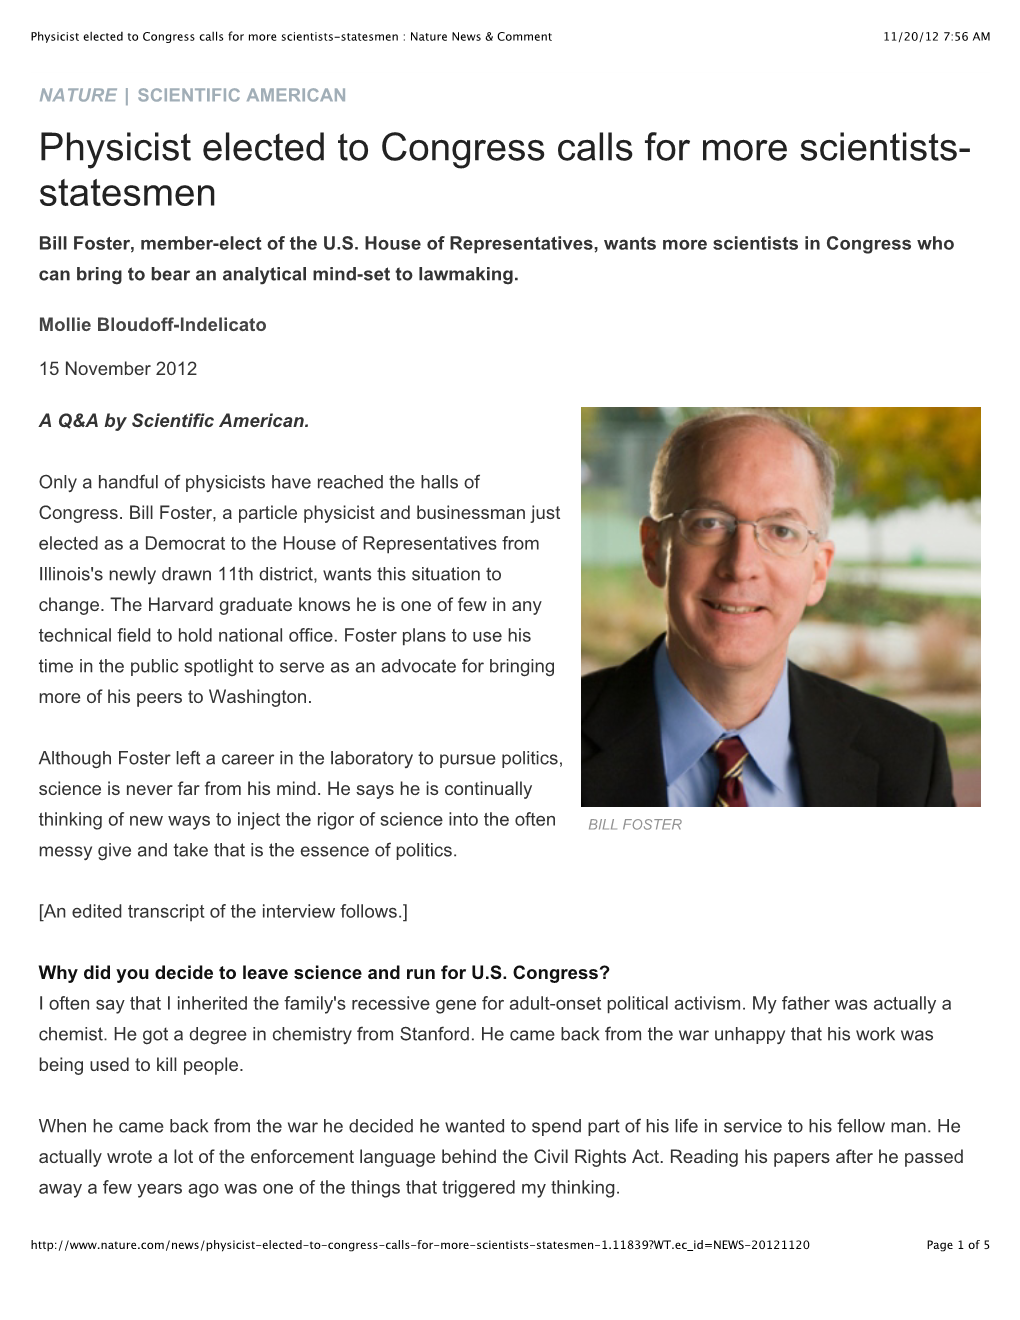 Physicist Elected to Congress Calls for More Scientists-Statesmen : Nature News & Comment 11/20/12 7:56 AM